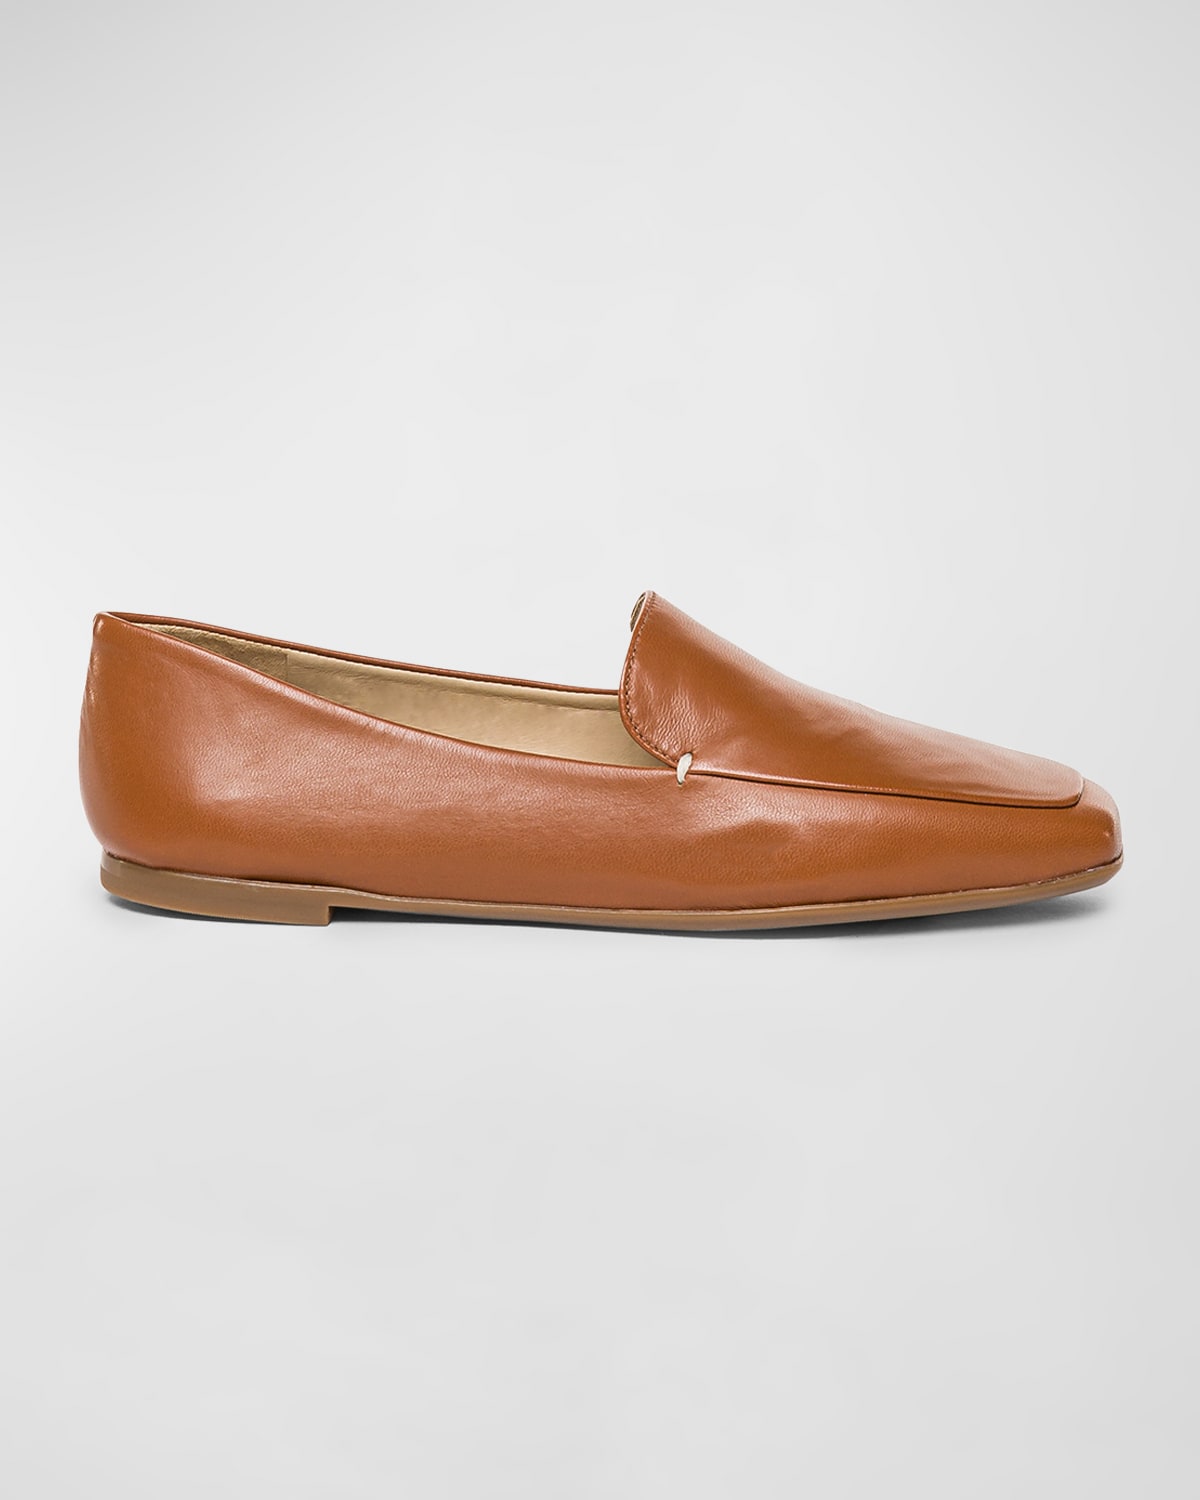 Leather Flat Moccasin Loafers